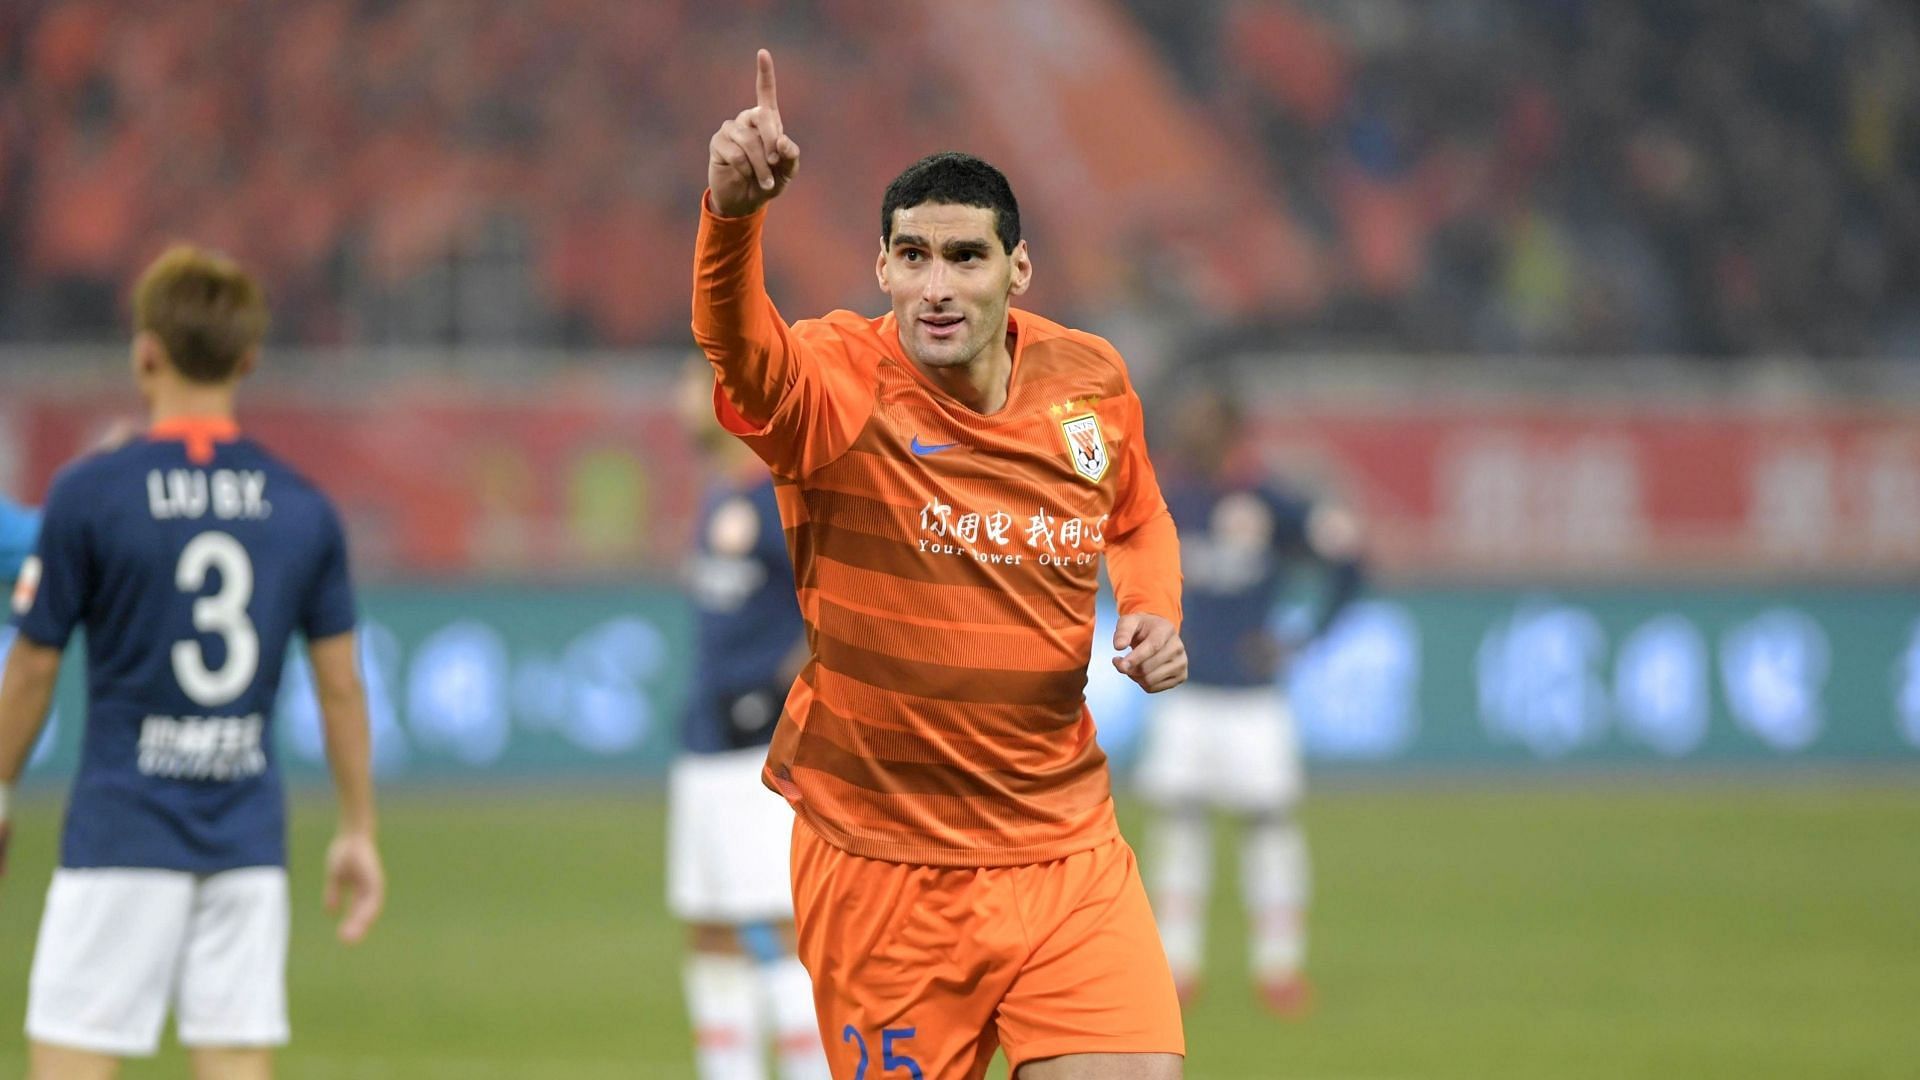 Shandong Taishan are one of the favorites to win the Chinese Super League this season